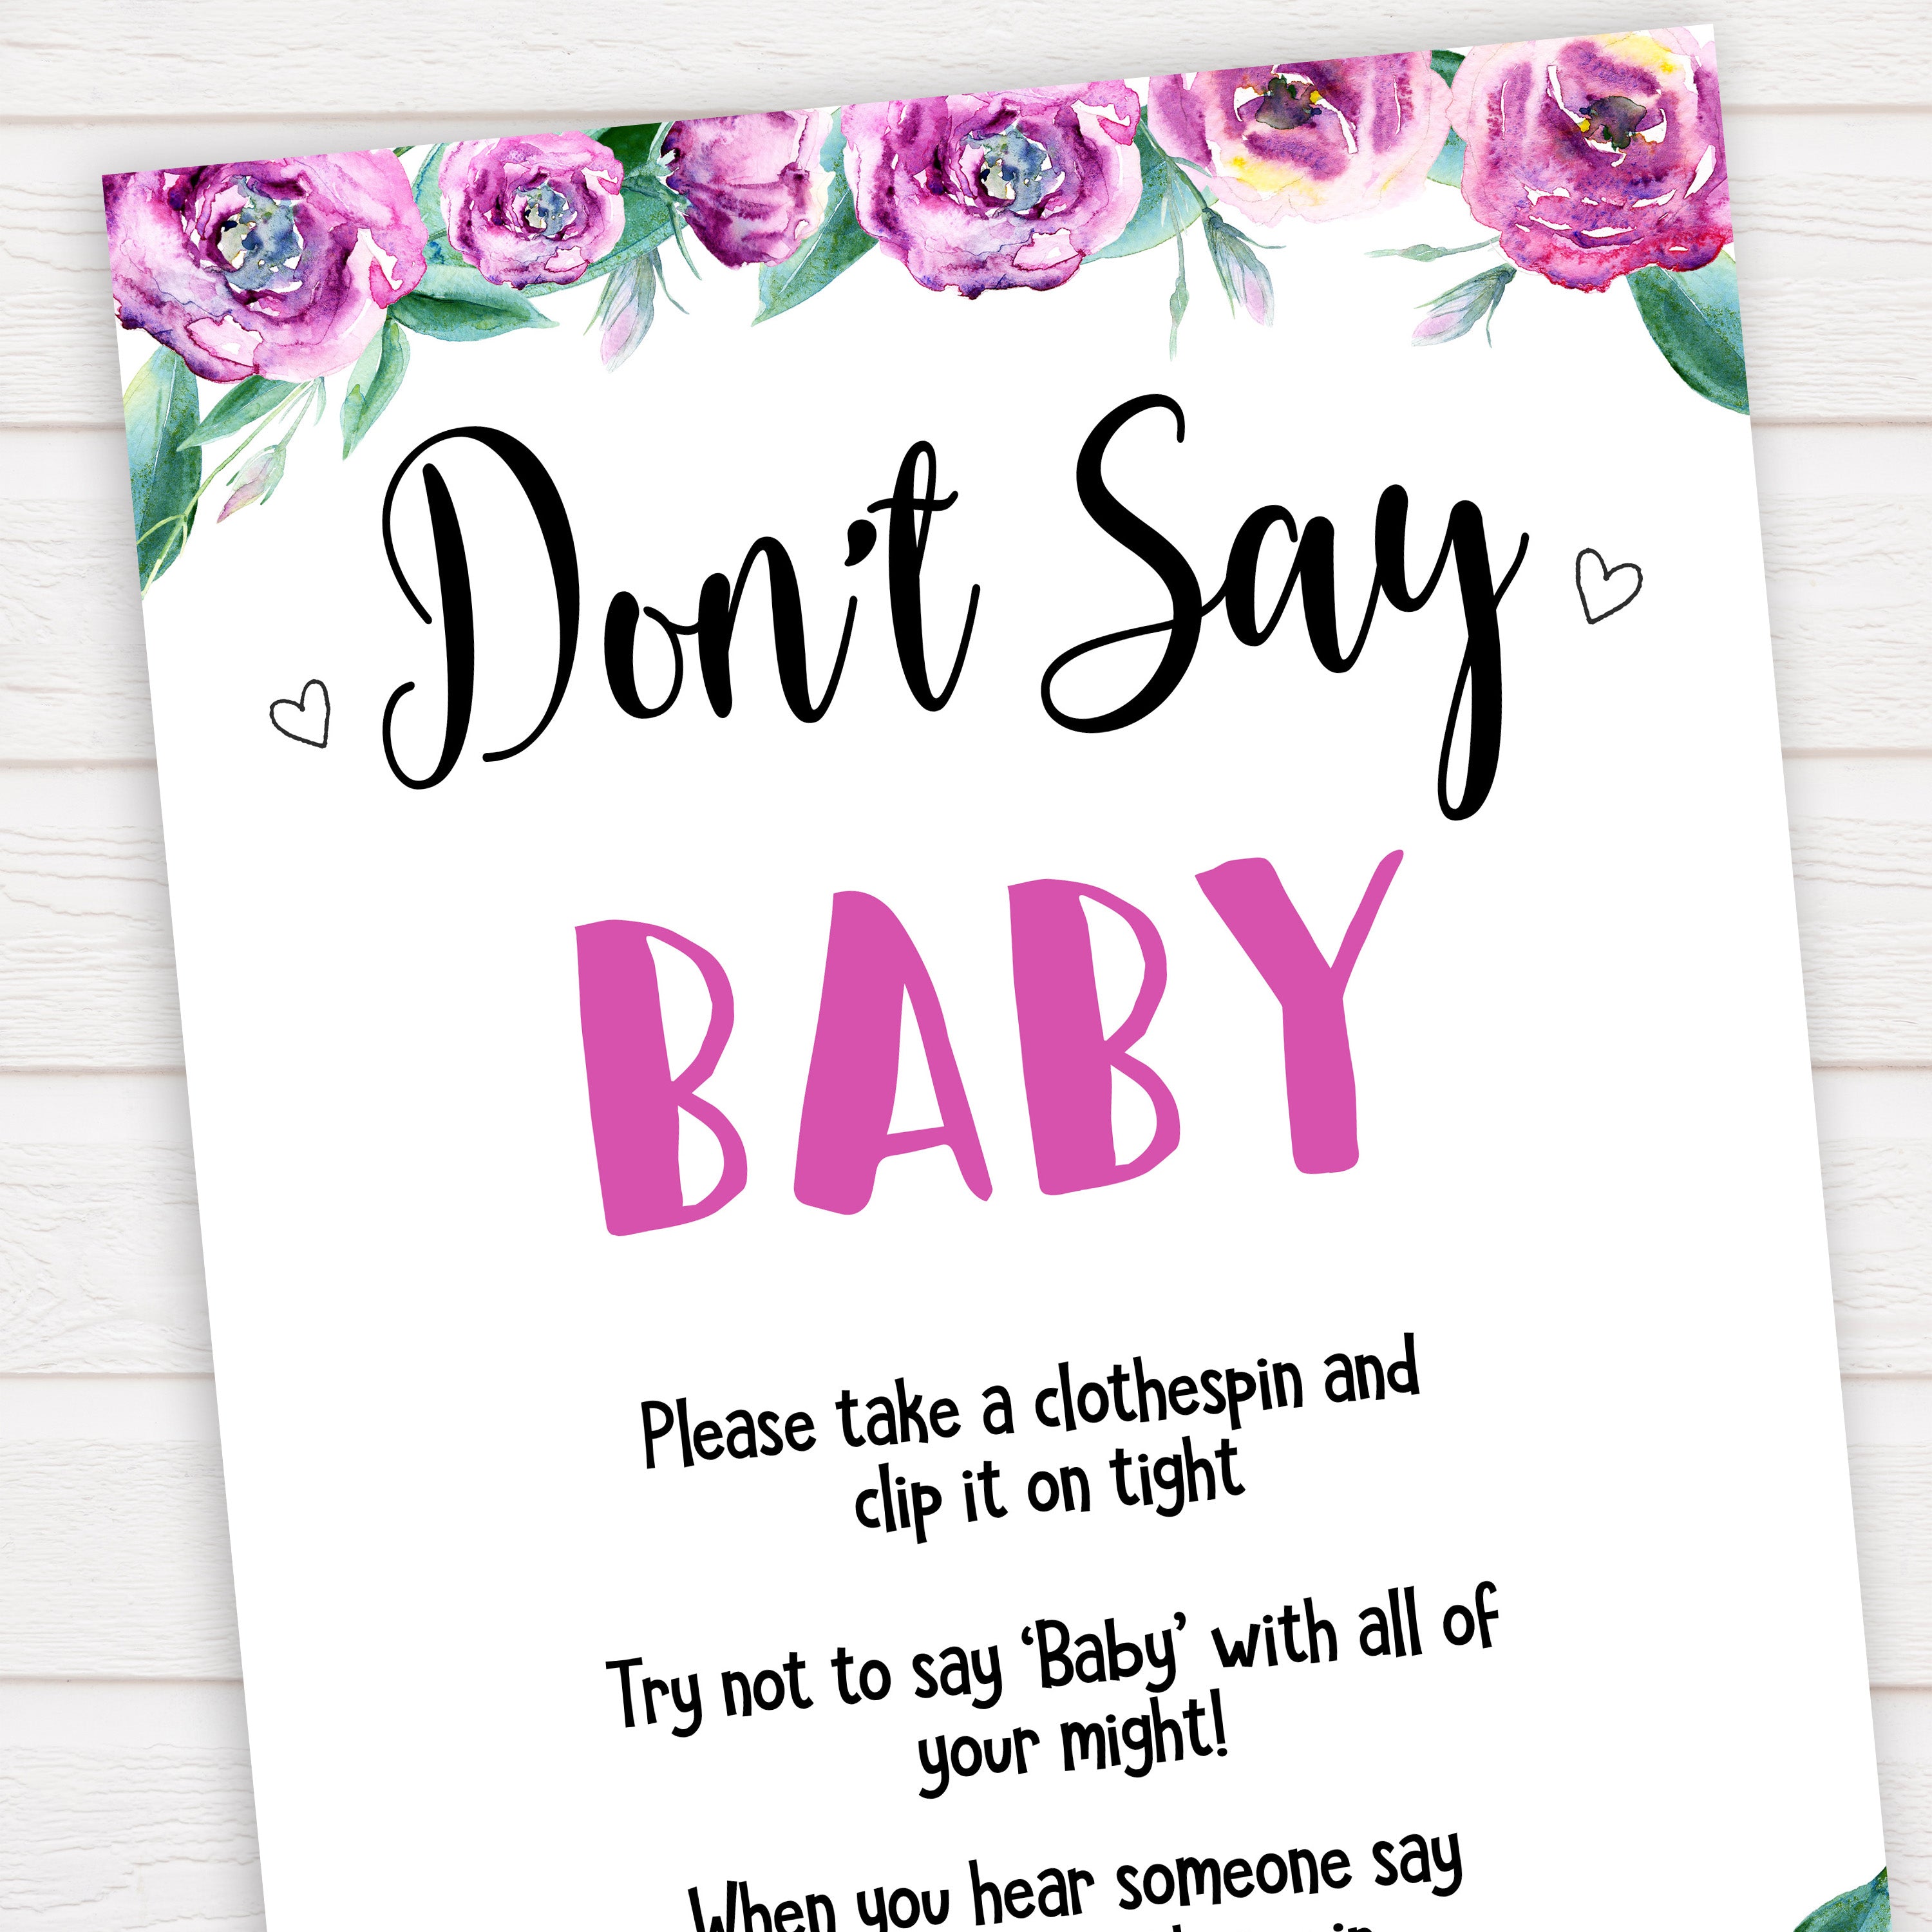 Purple peonies dont say baby baby shower games, printable baby shower games, fun baby shower games, baby shower games, popular baby shower games, floral baby shower games, purple baby shower themes